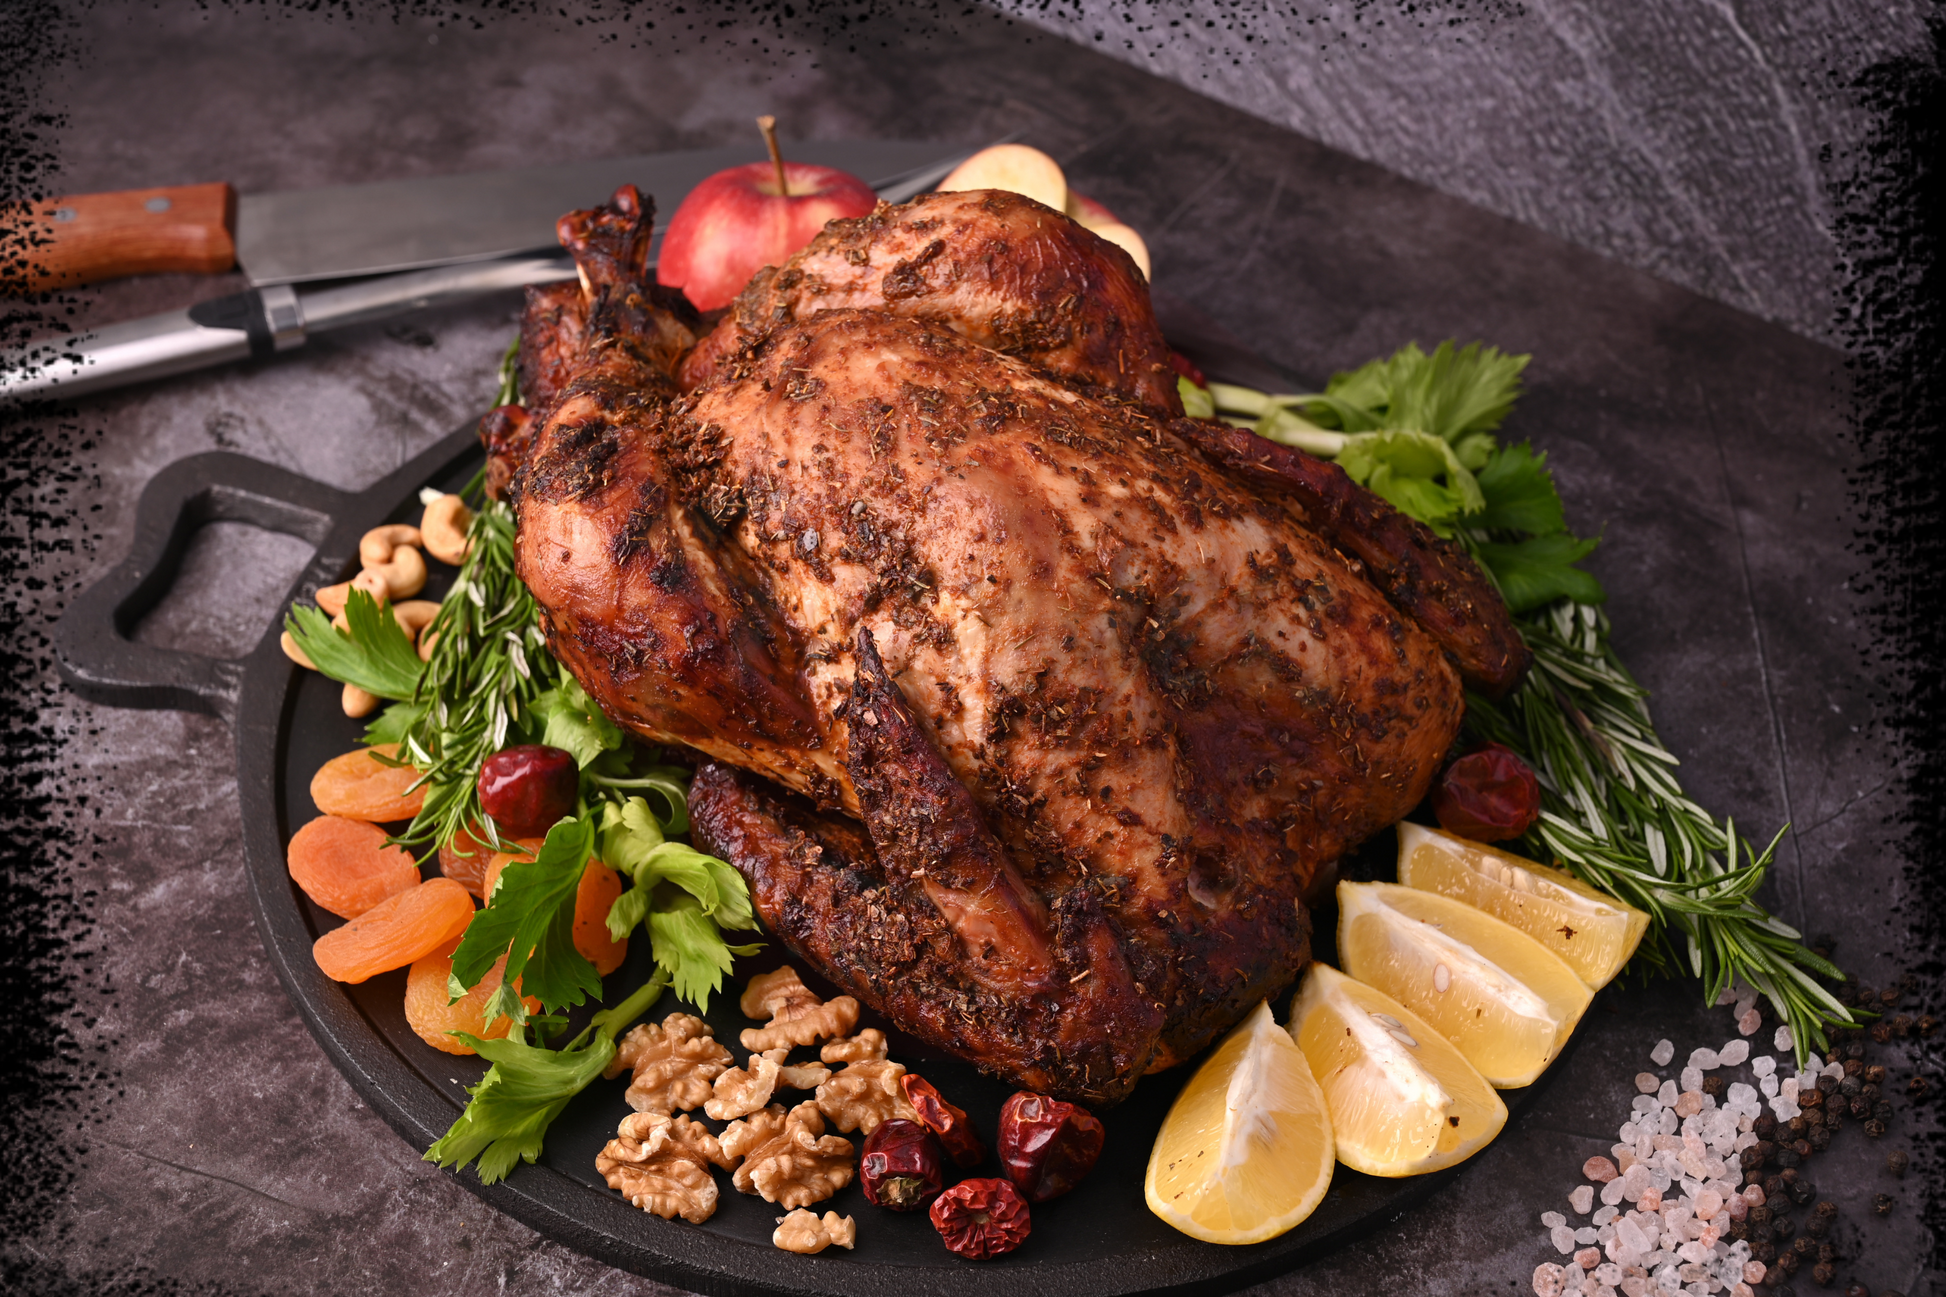 Traditional Roasted Stuffed Whole Turkey - Approx. 2.50kg